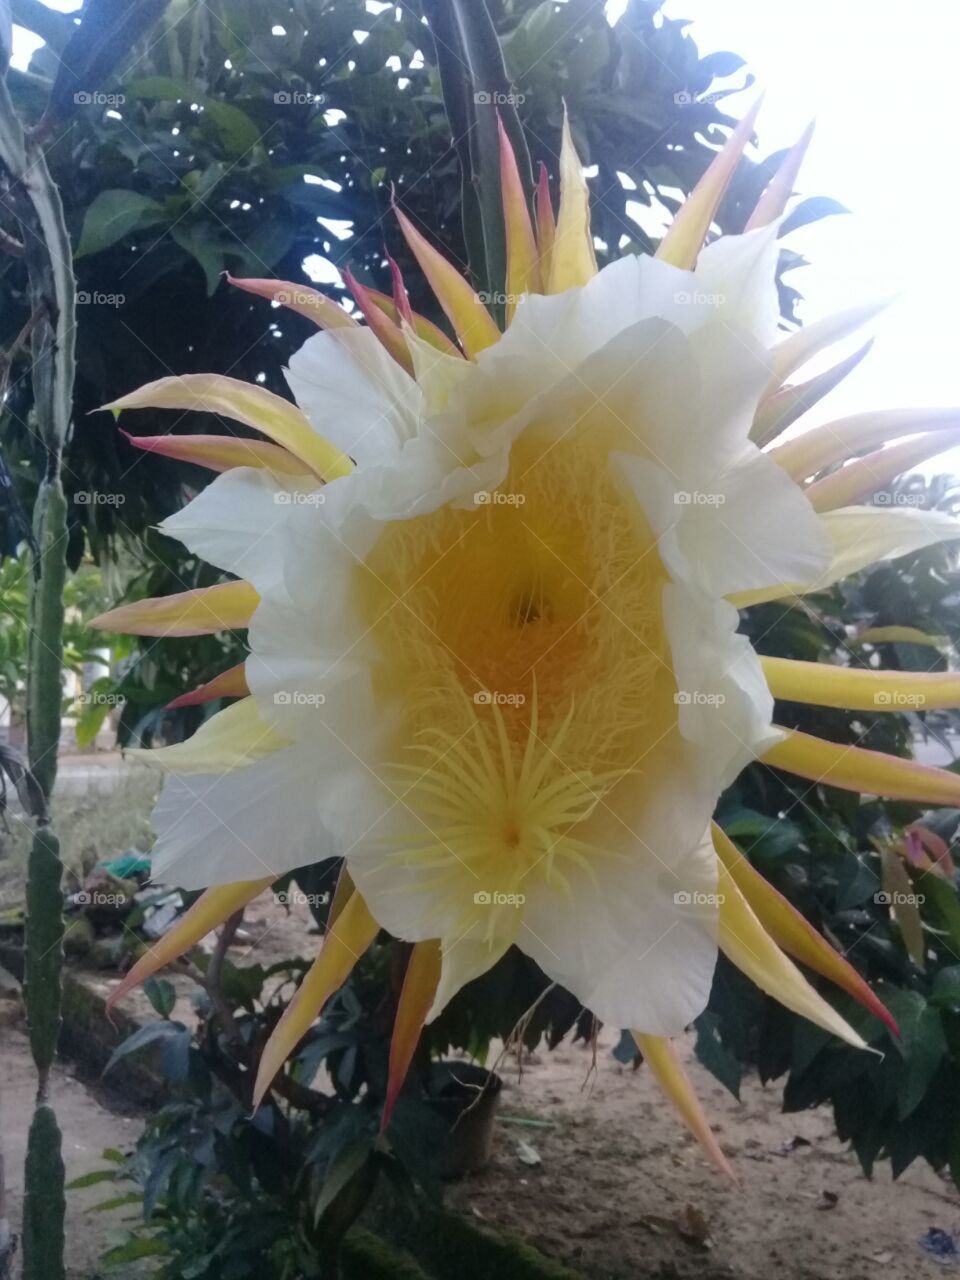 This is flower of fruit dragon flower, so beautiful li look inside so much a nucleus and beside the flower is a have a sheath so good.